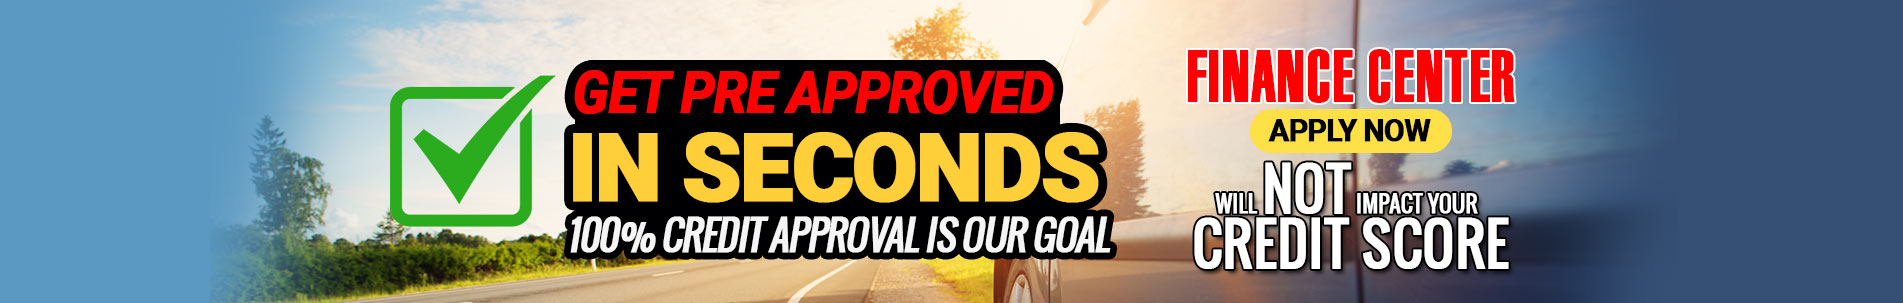 Get Pre Approved In Seconds